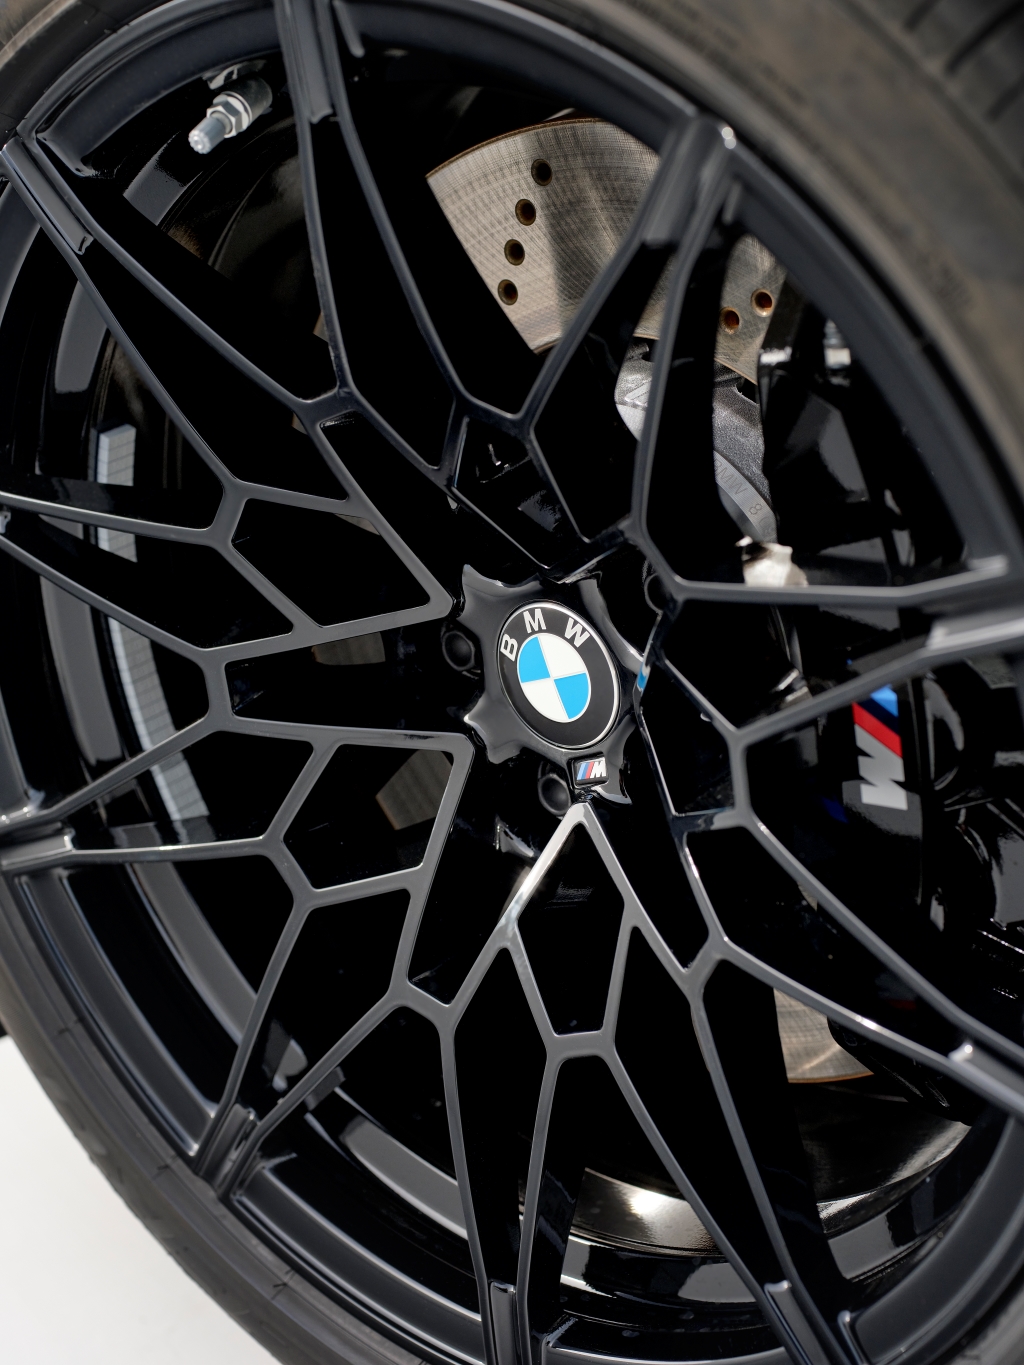 New Jetblack alloy wheels with a split-spoke design will be standard fare for the new G80 BMW M3 from Q4 2024.